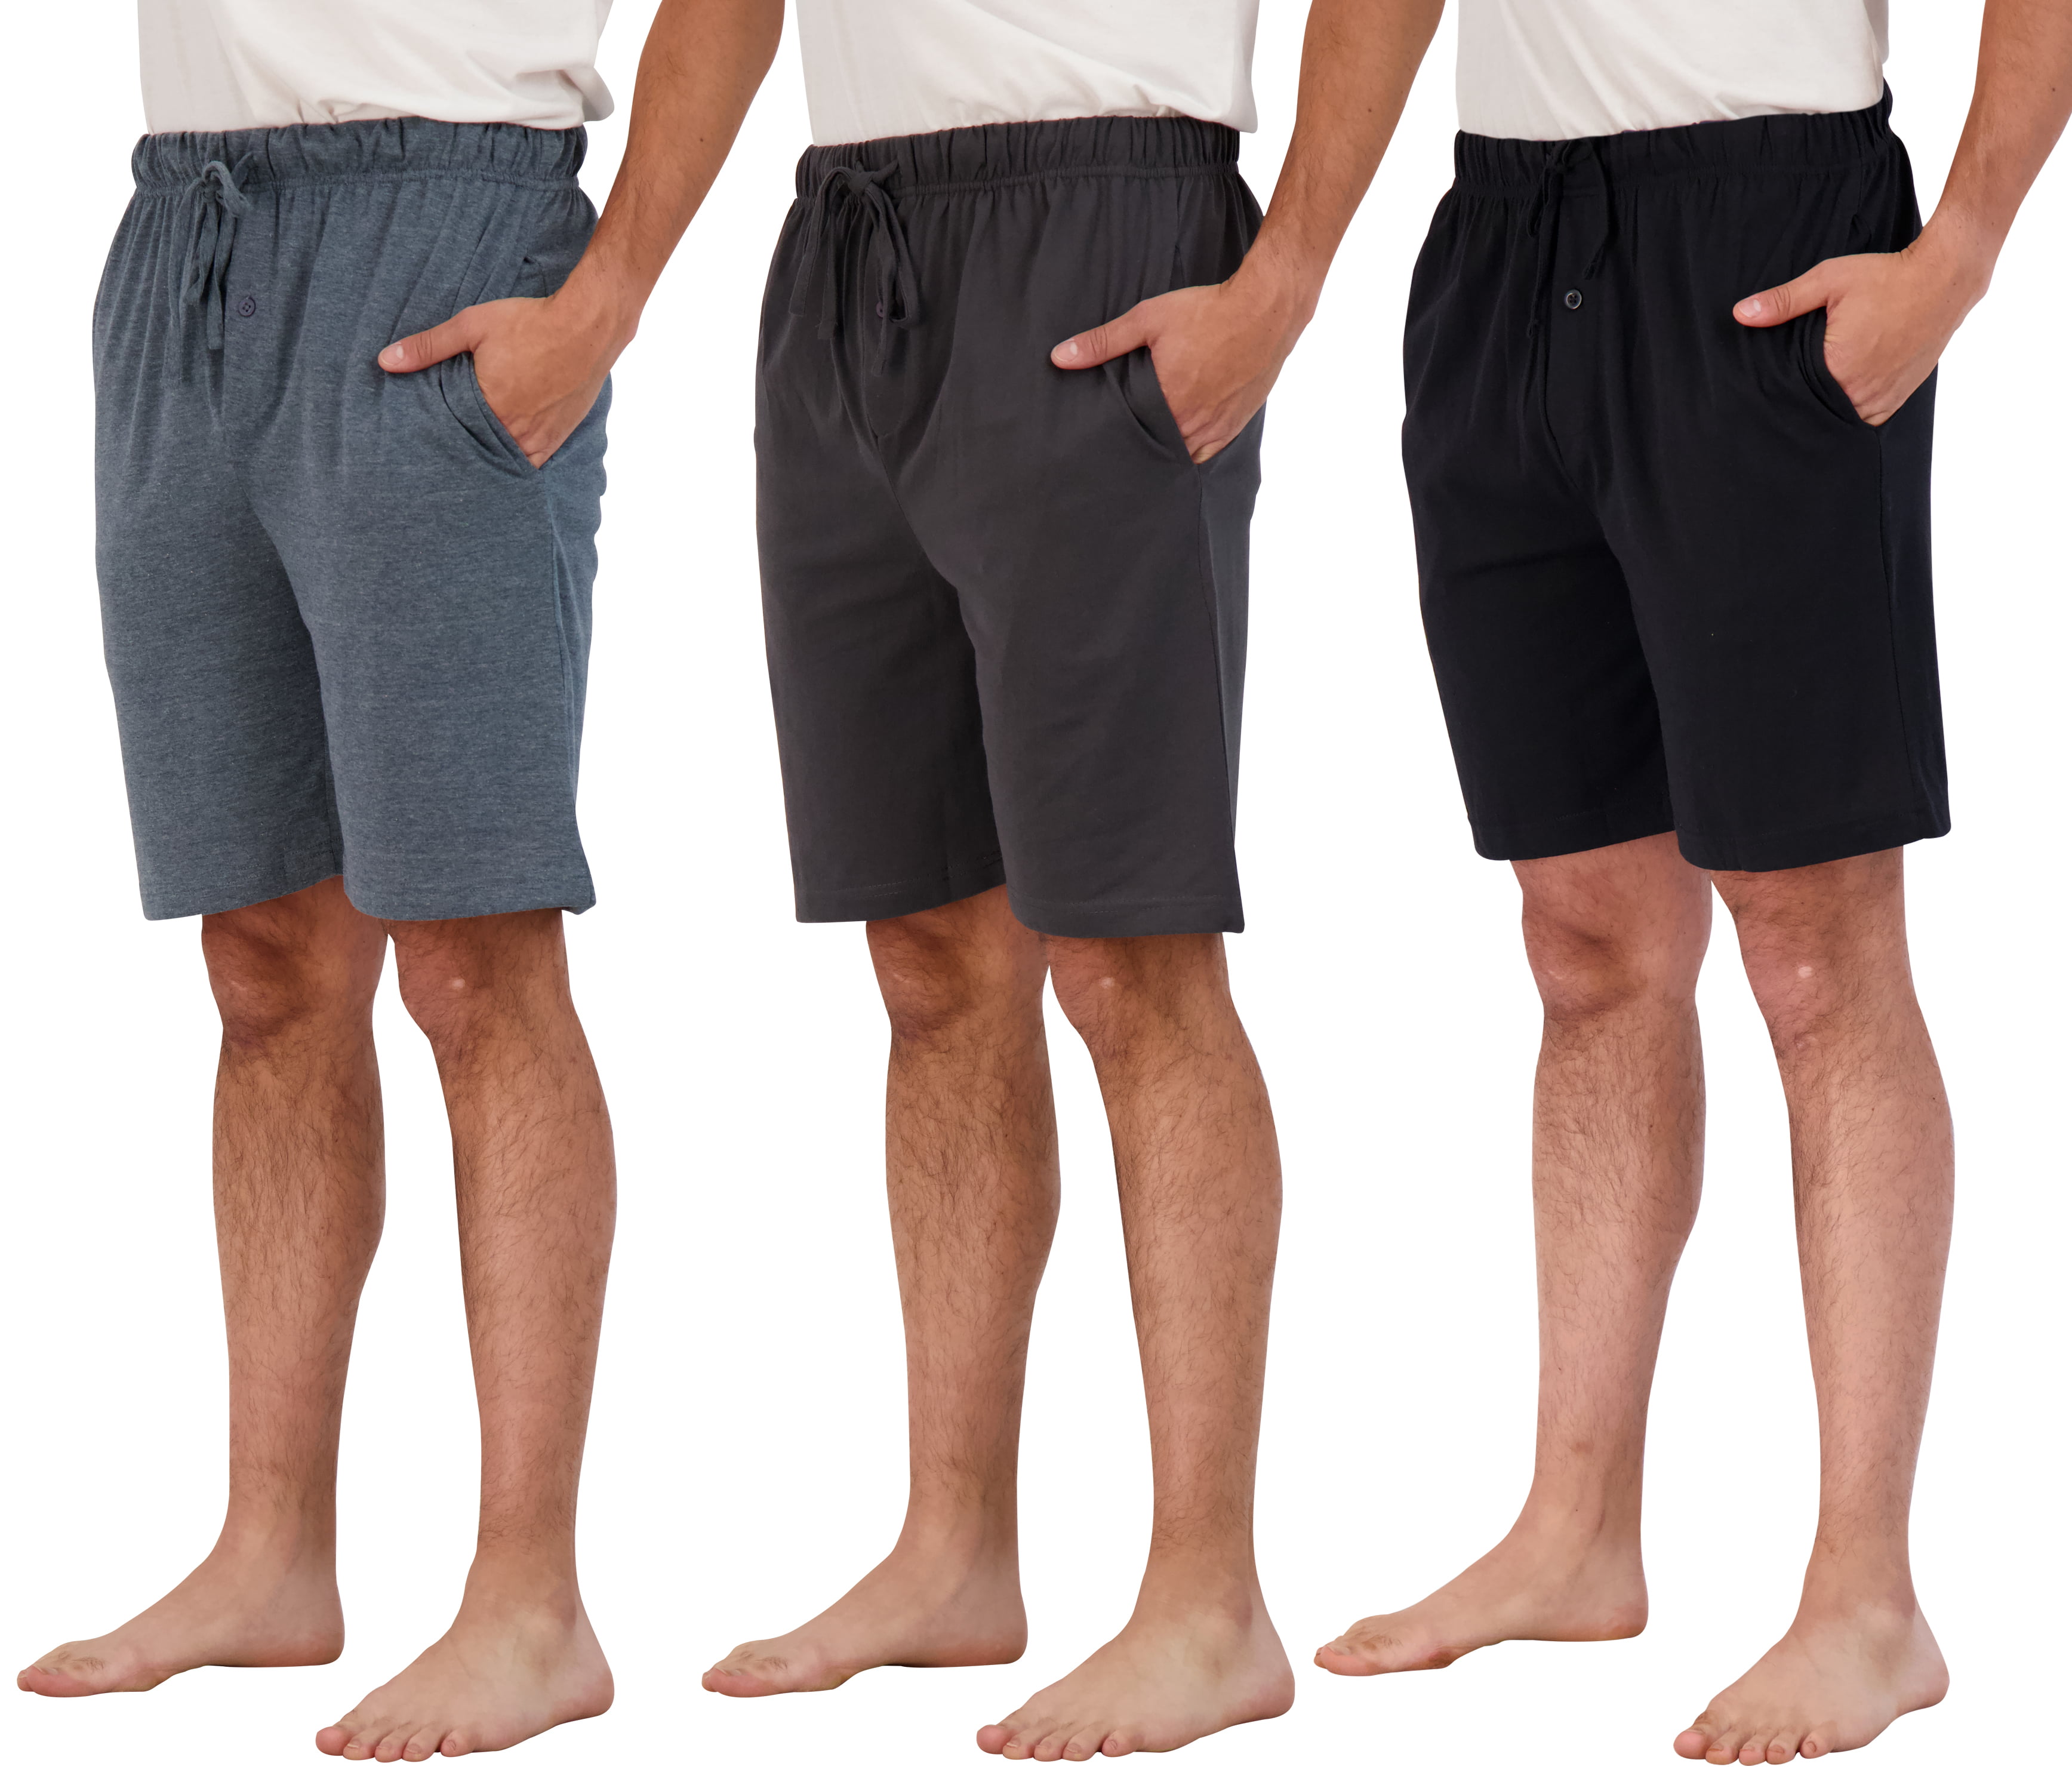 Real Essentials Men's 3-Pack Soft Knit Sleep Shorts, Sizes S-3XL, Mens ...